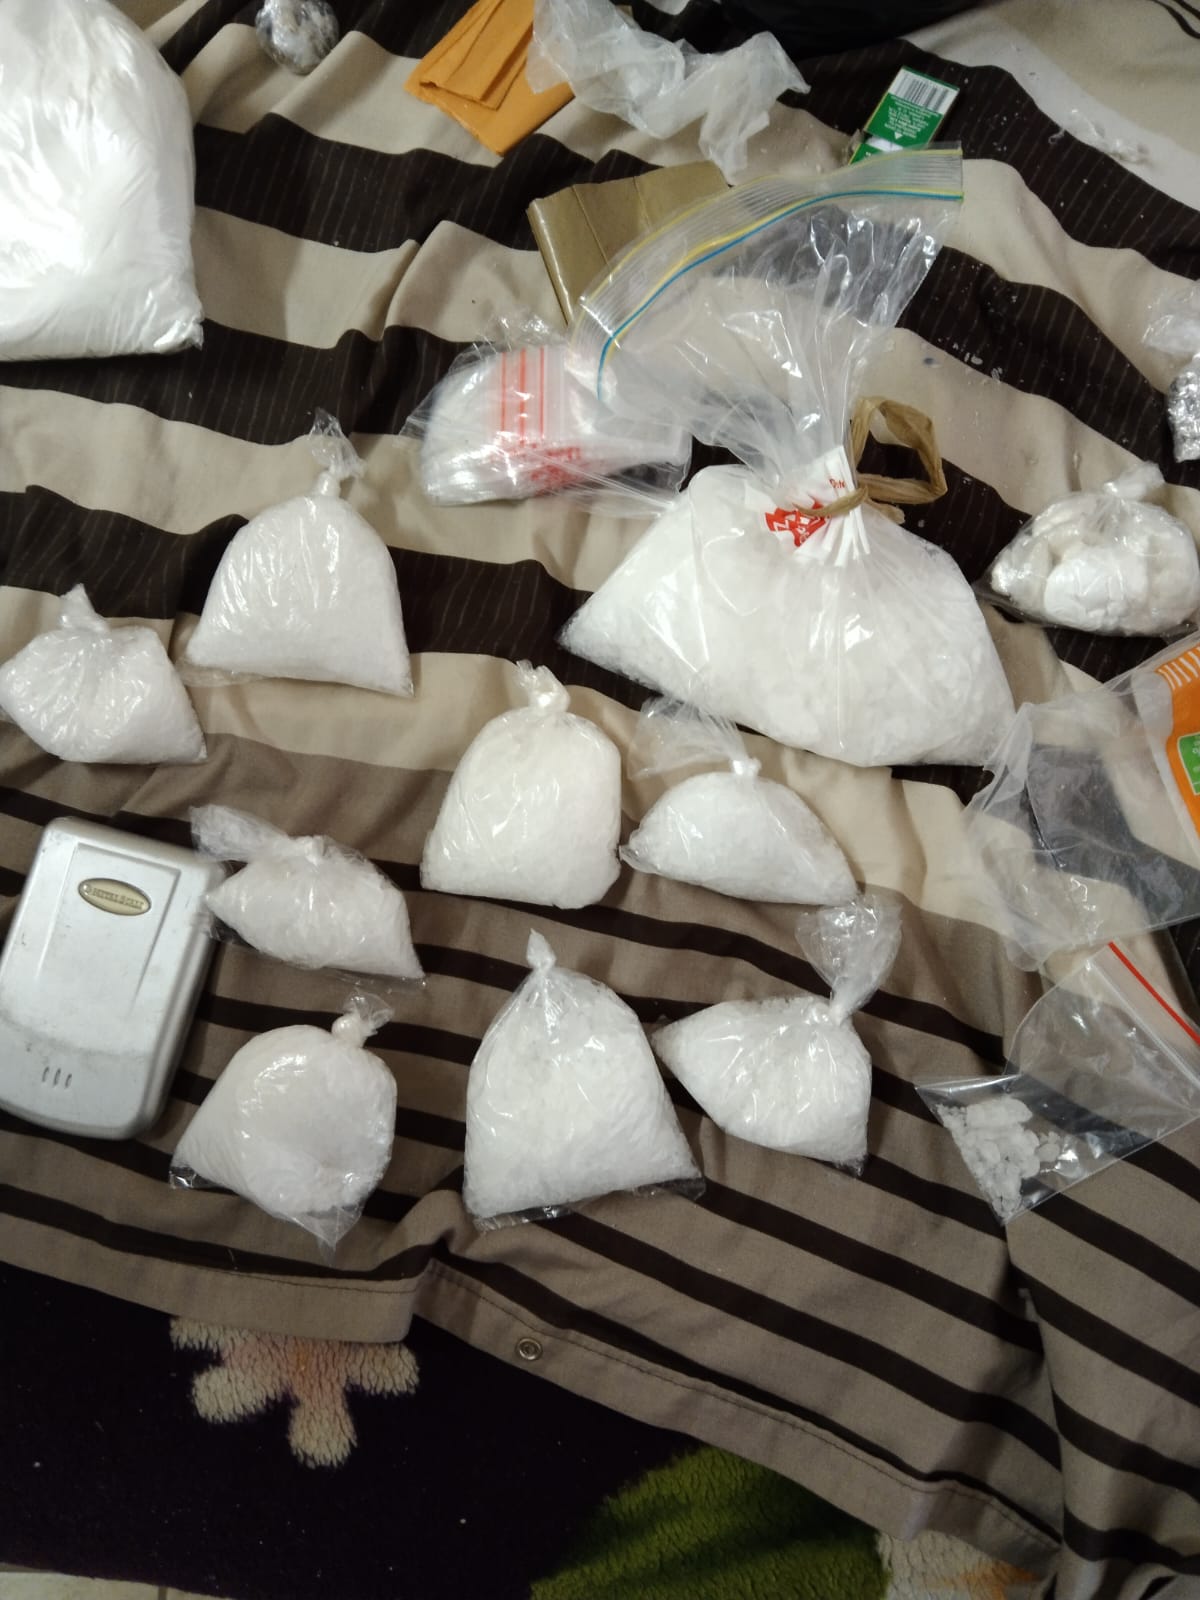 POLICE POUNCE ON A DRUG LAB IN POLOKWANE AND CONFISCATE DRUGS WORTH ONE MILLION RAND